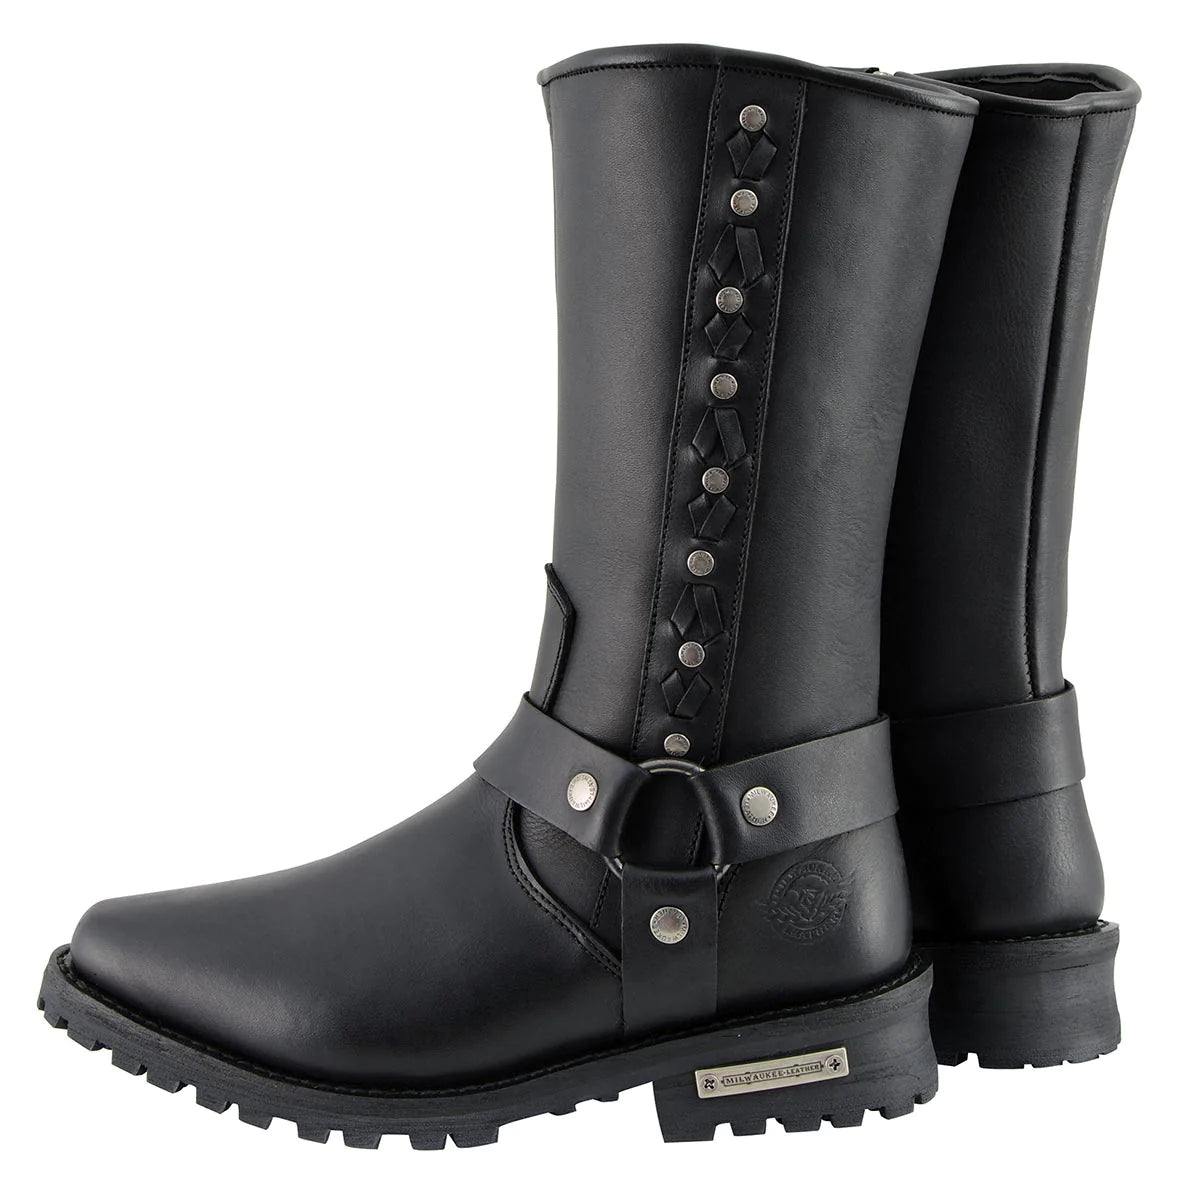 Men's Black Harness Boots with Braid and Riveted Details